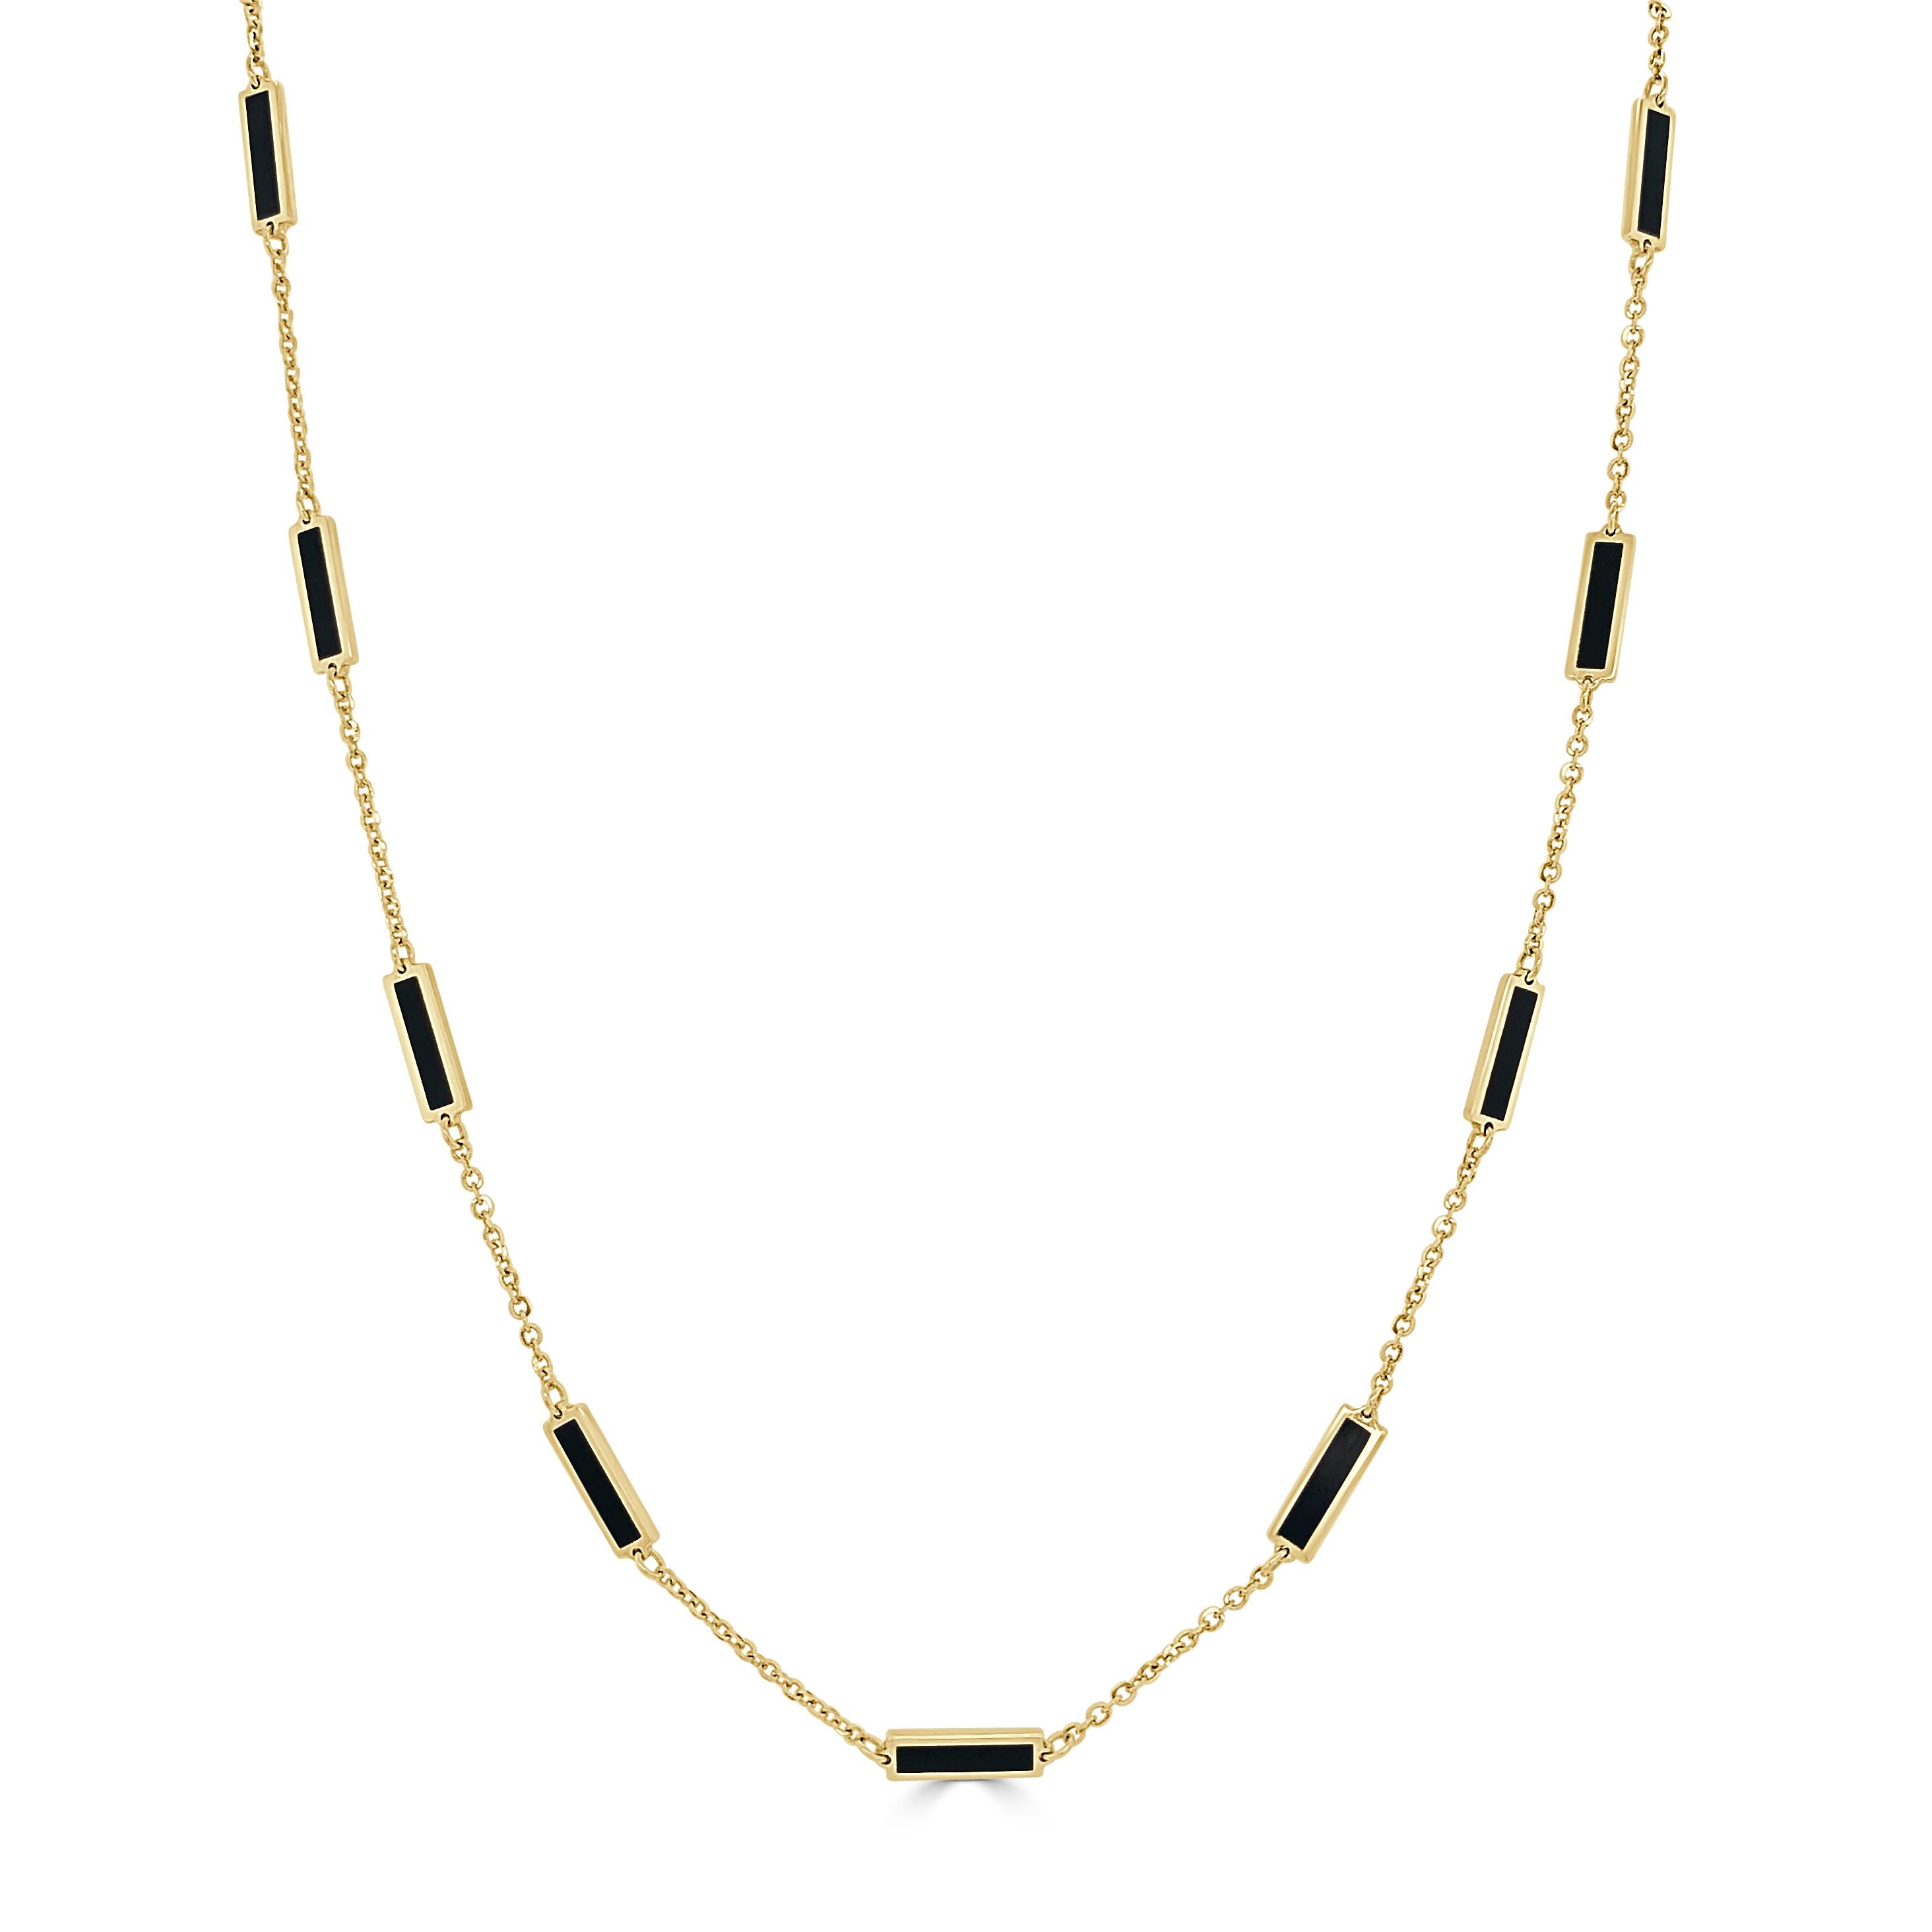 Quality Gemstone Bar Necklace: Focused on design and detail, these beautiful colored gemstone necklace features a station bar design and is crafted of 14k yellow gold. Necklace measurement is 18